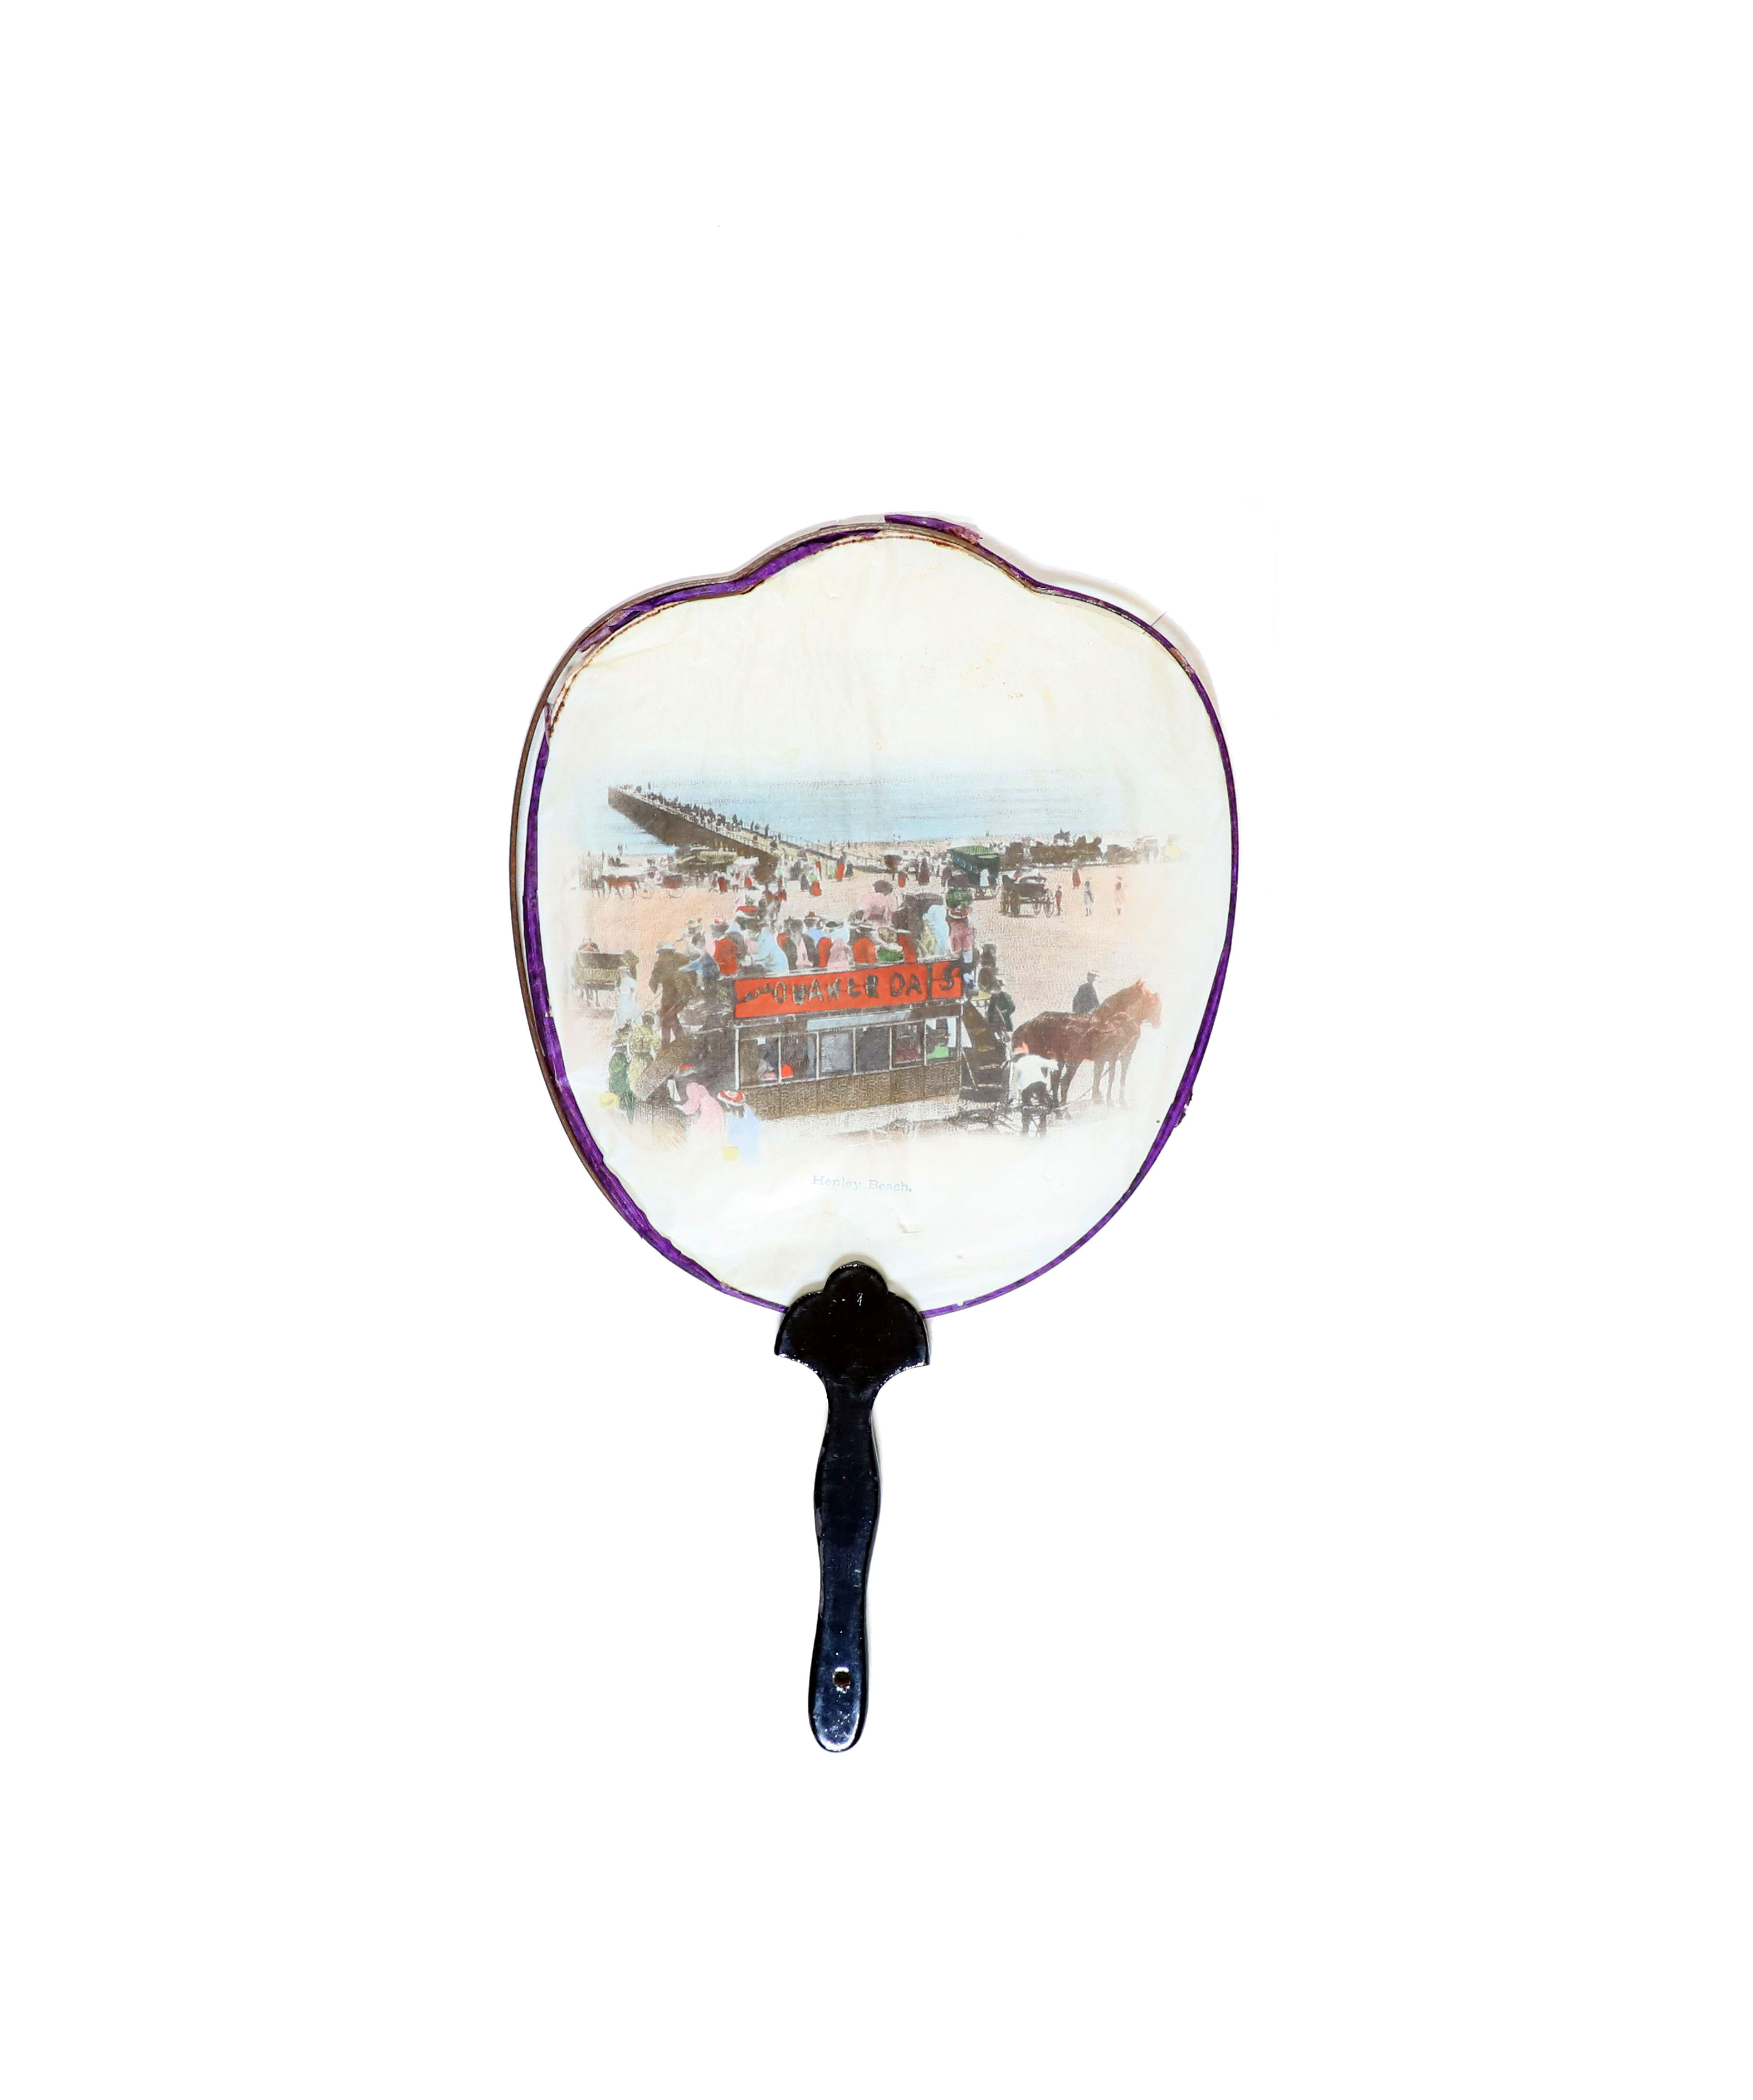 Japanese style paper fan printed with image of a beach with a jetty and tram. 